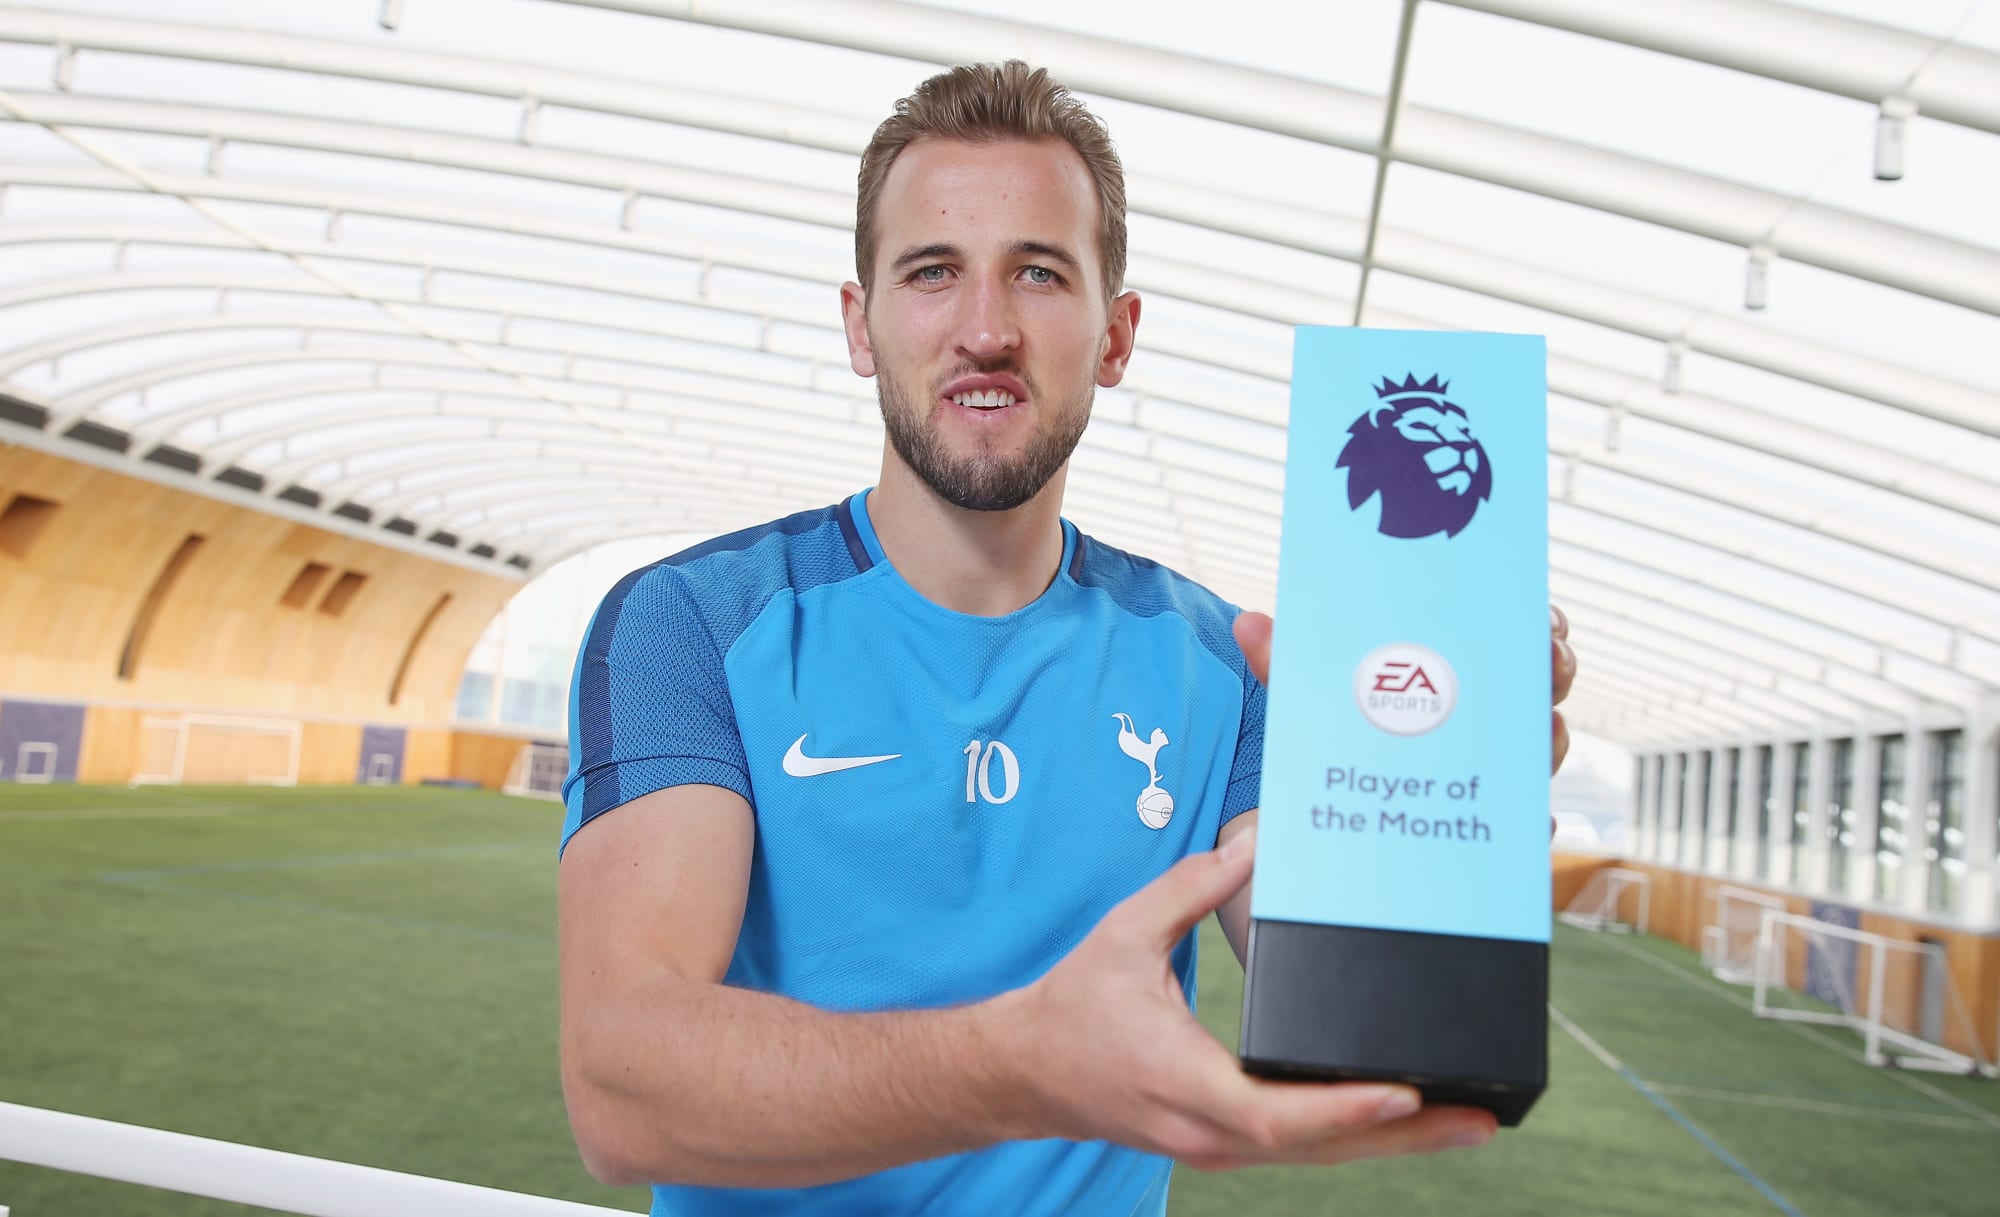 Ea Player Of The Month